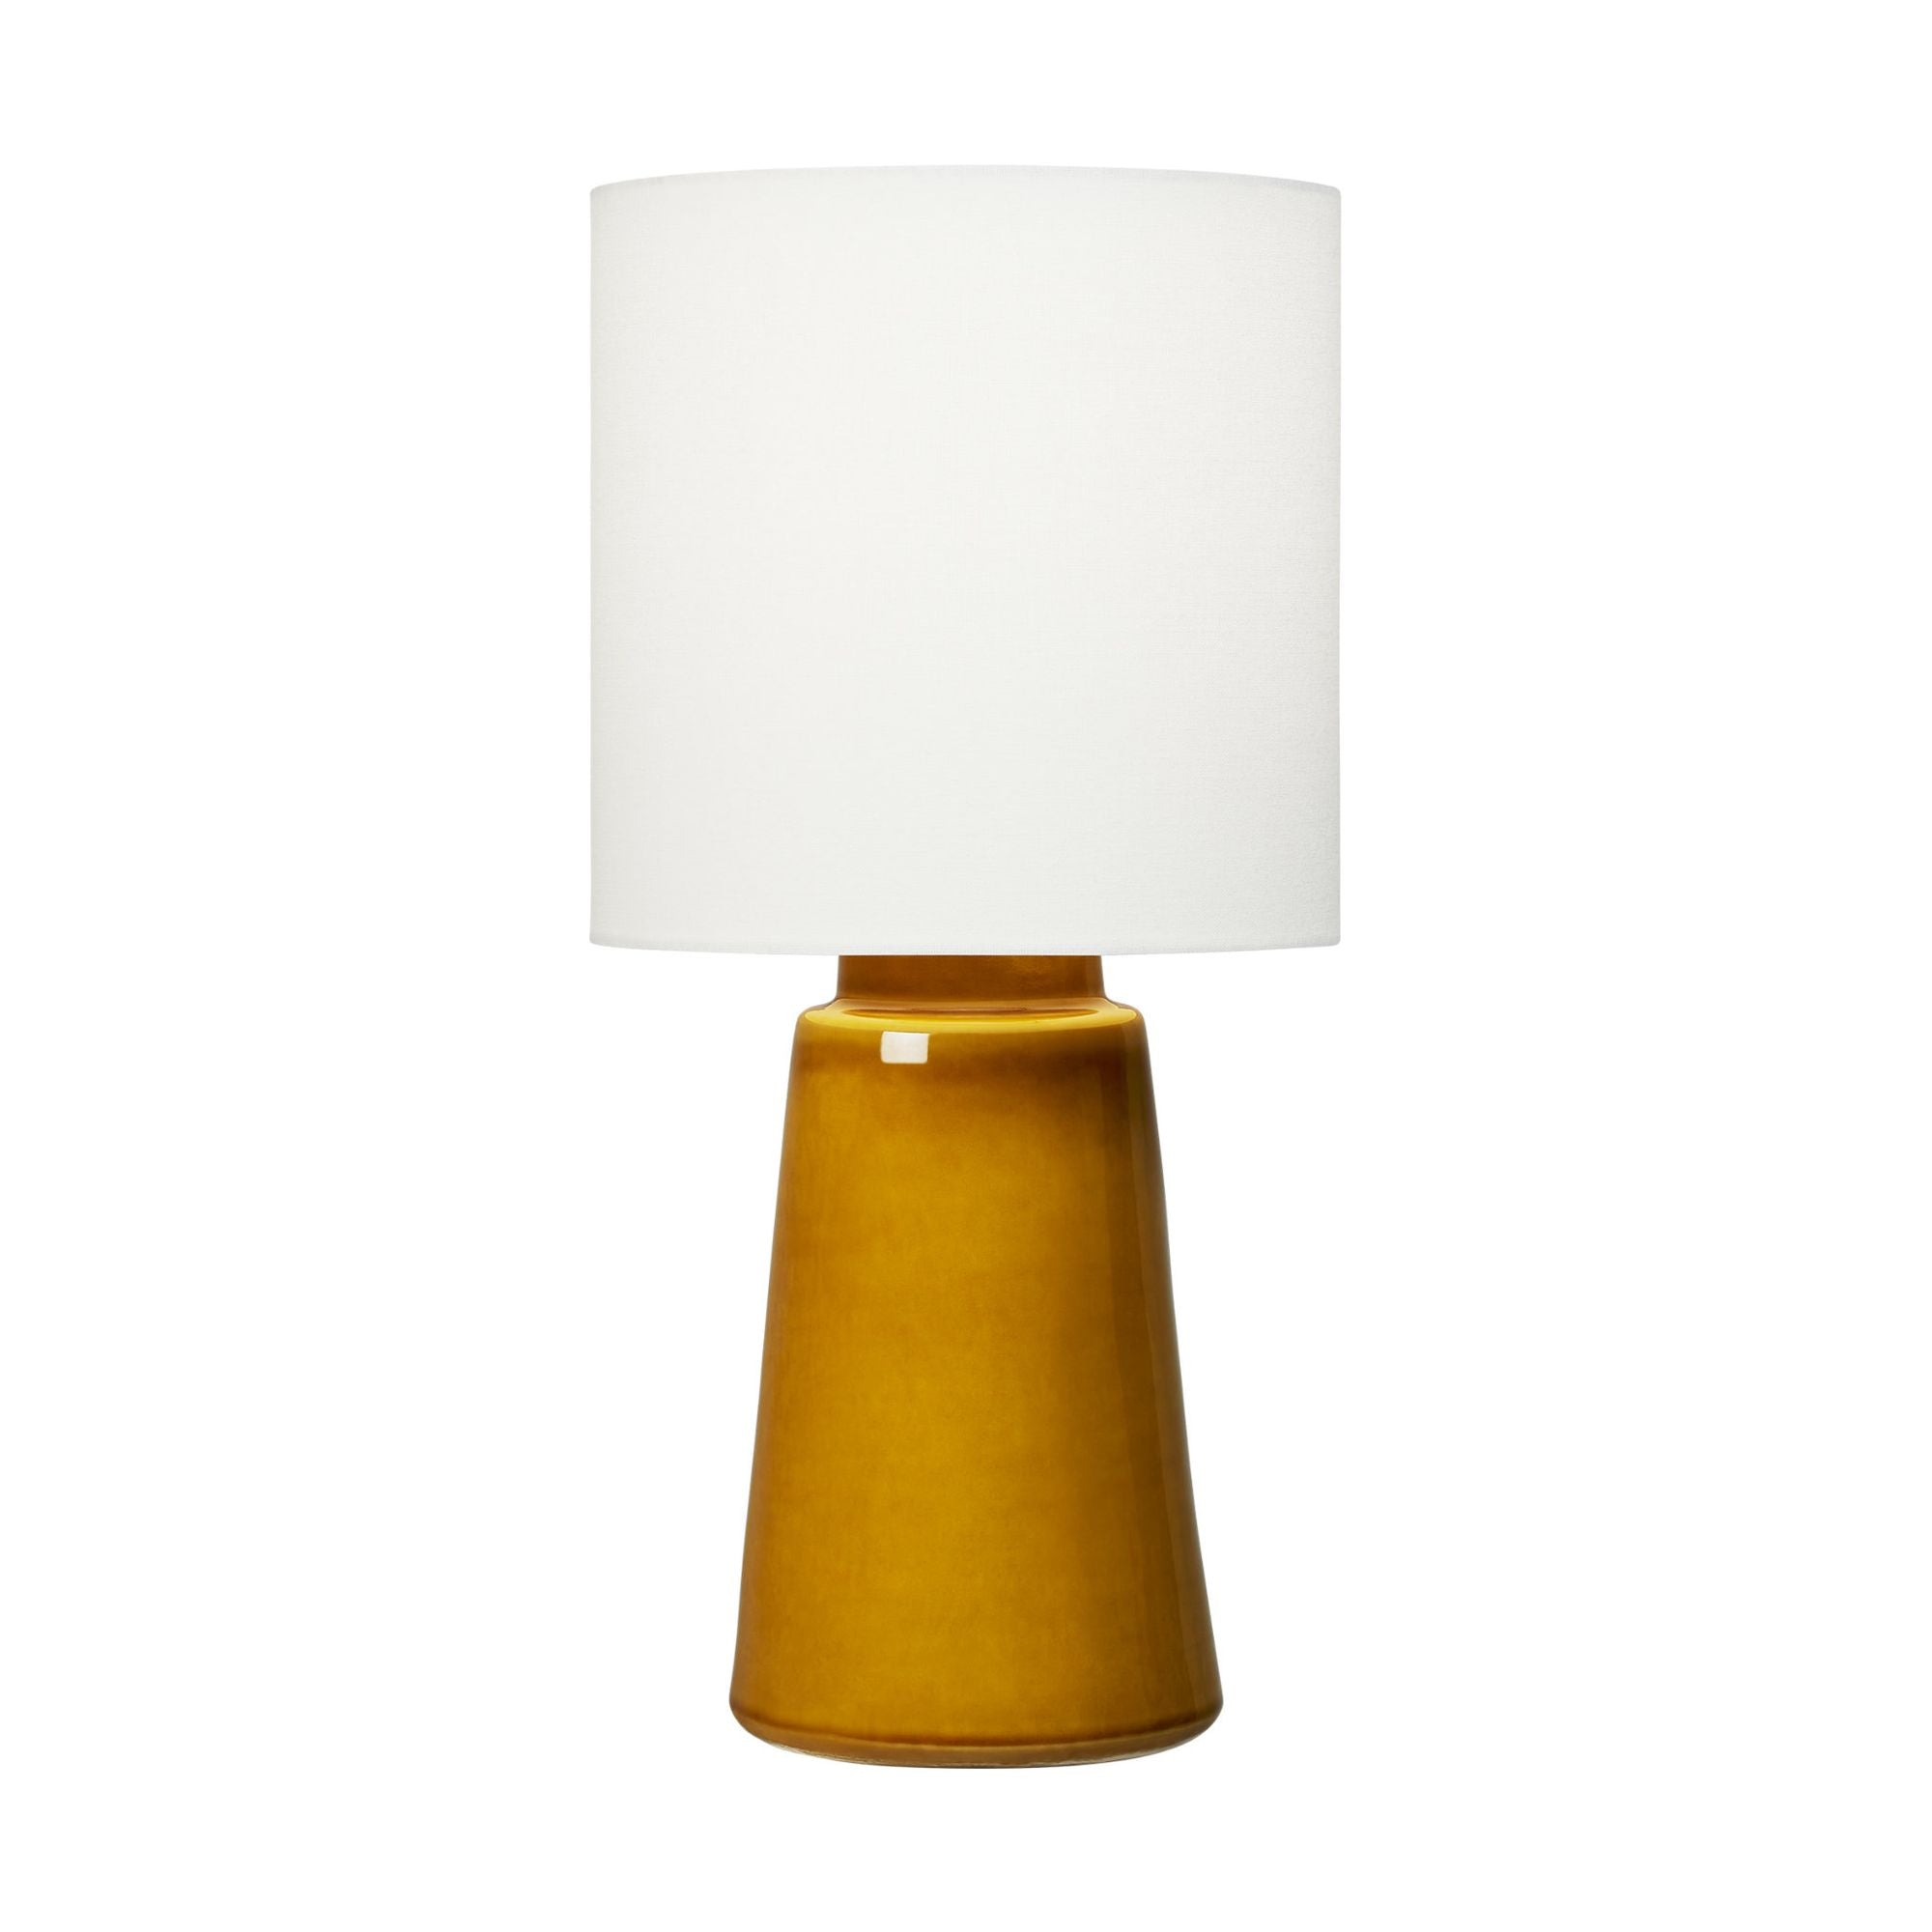 Barbara Barry Vessel Medium Table Lamp in Oil Can